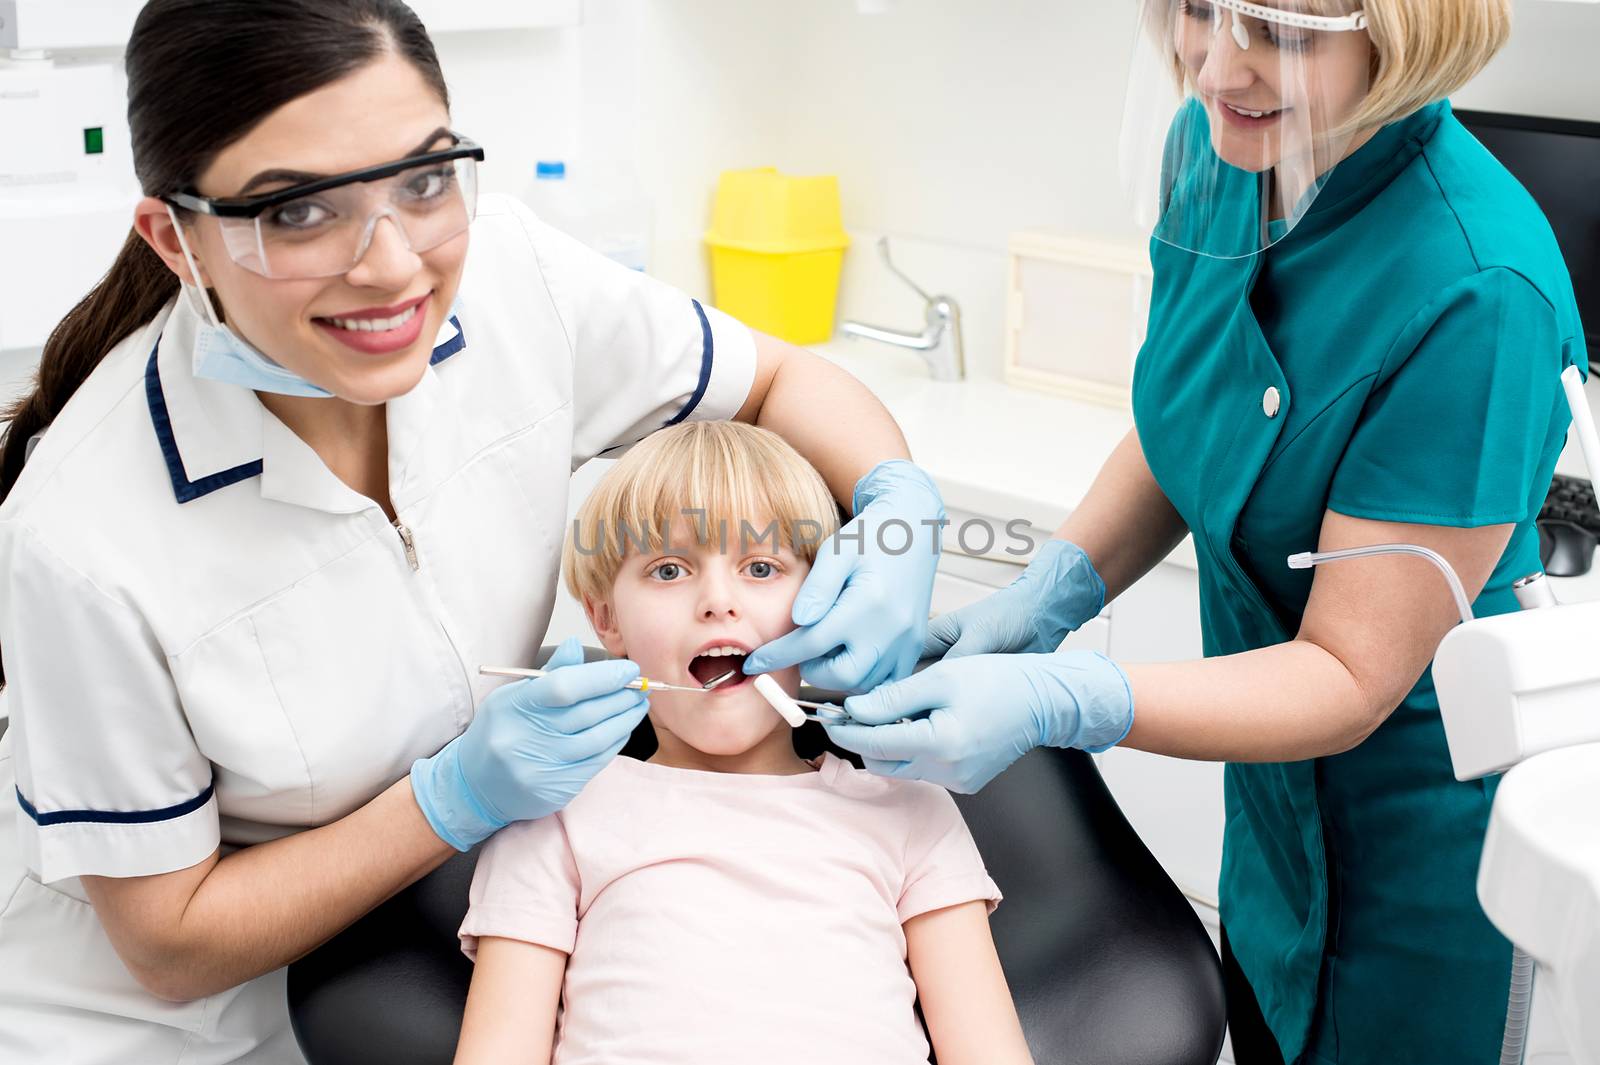 Dentist and nurse are curing a little girl patient